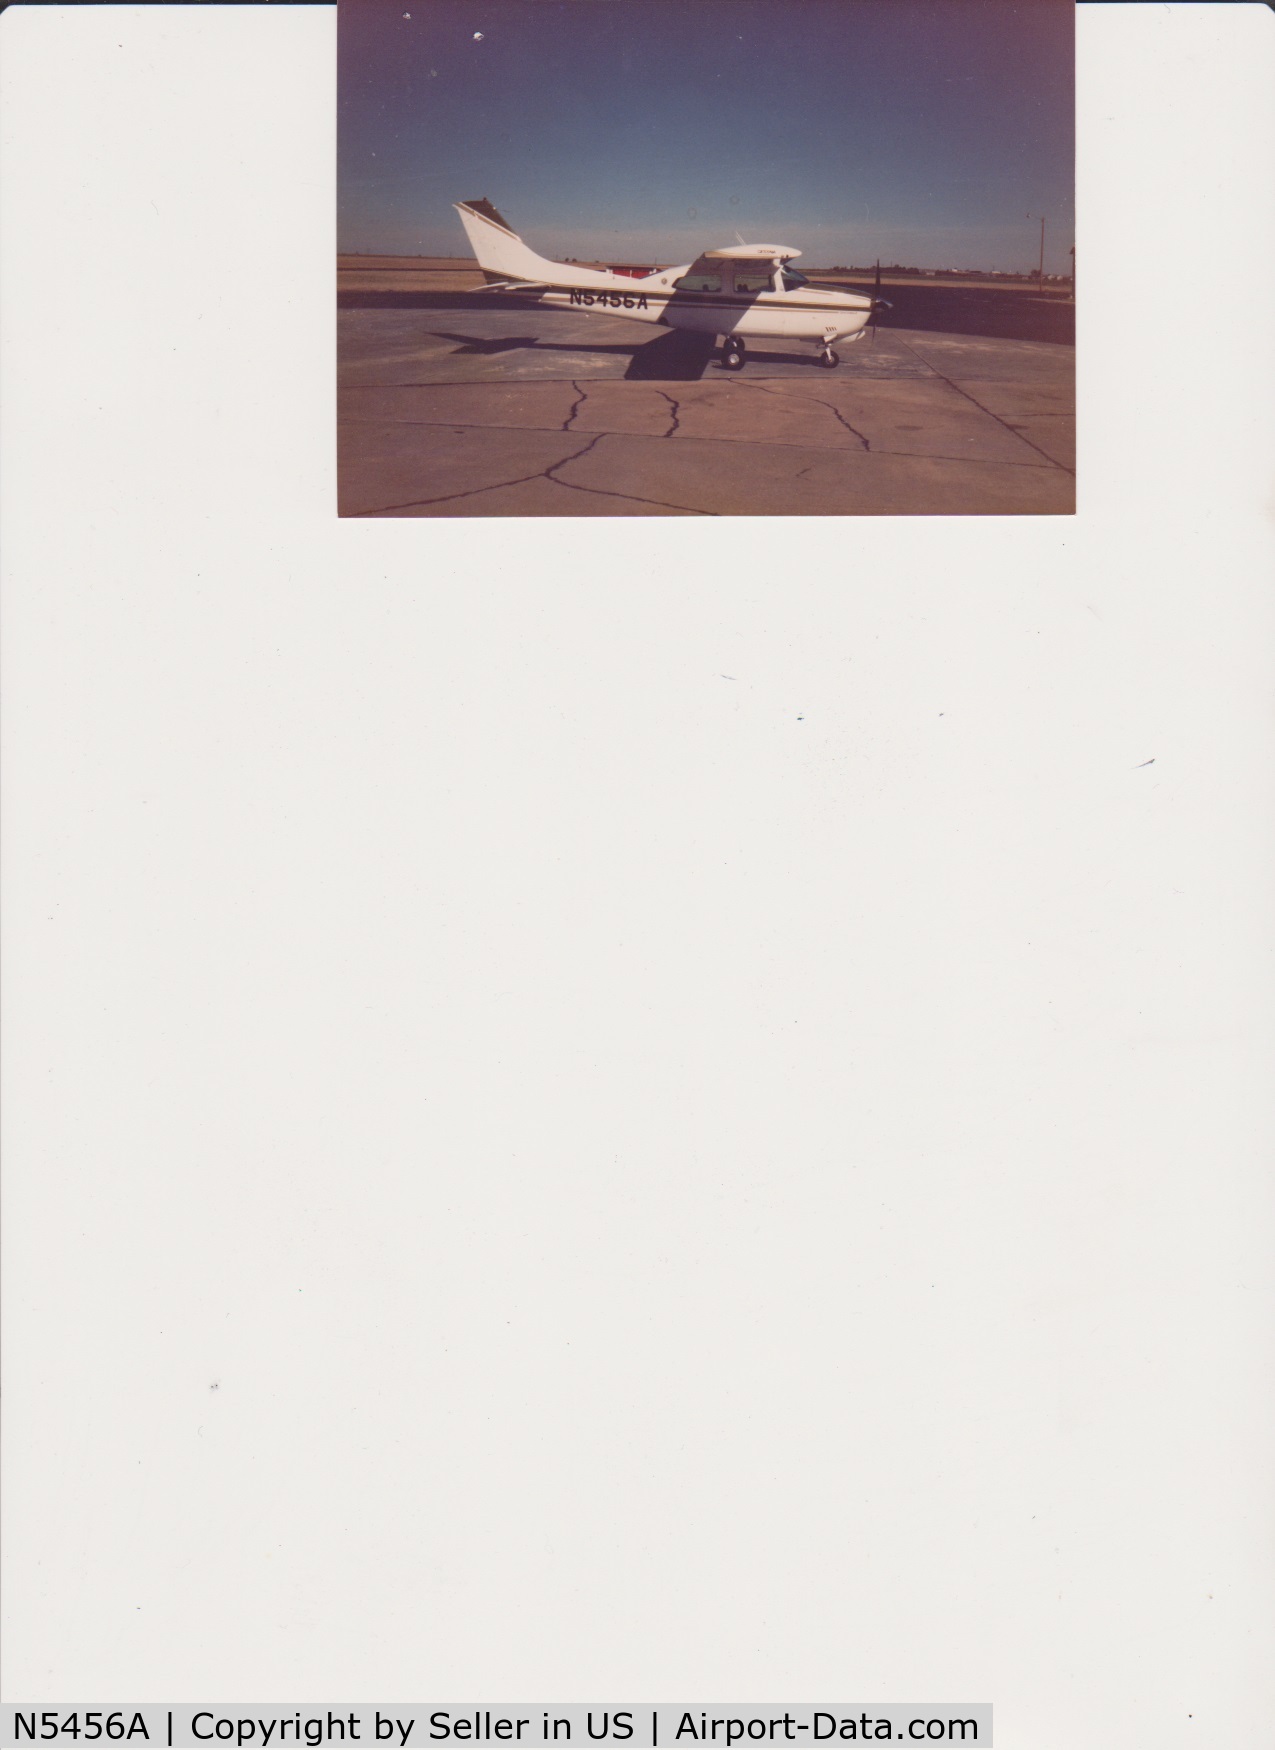 N5456A, Cessna 210N Centurion C/N 21063448, Photo taken before being ferried to Australia. Negotiated by Bob Douglas based in Adelaide, South Australia in 1987, delivered, after being put on on the Australian register late in 1987. Registered at VH-DAN (owner Dan Hughes based in Townsville.)